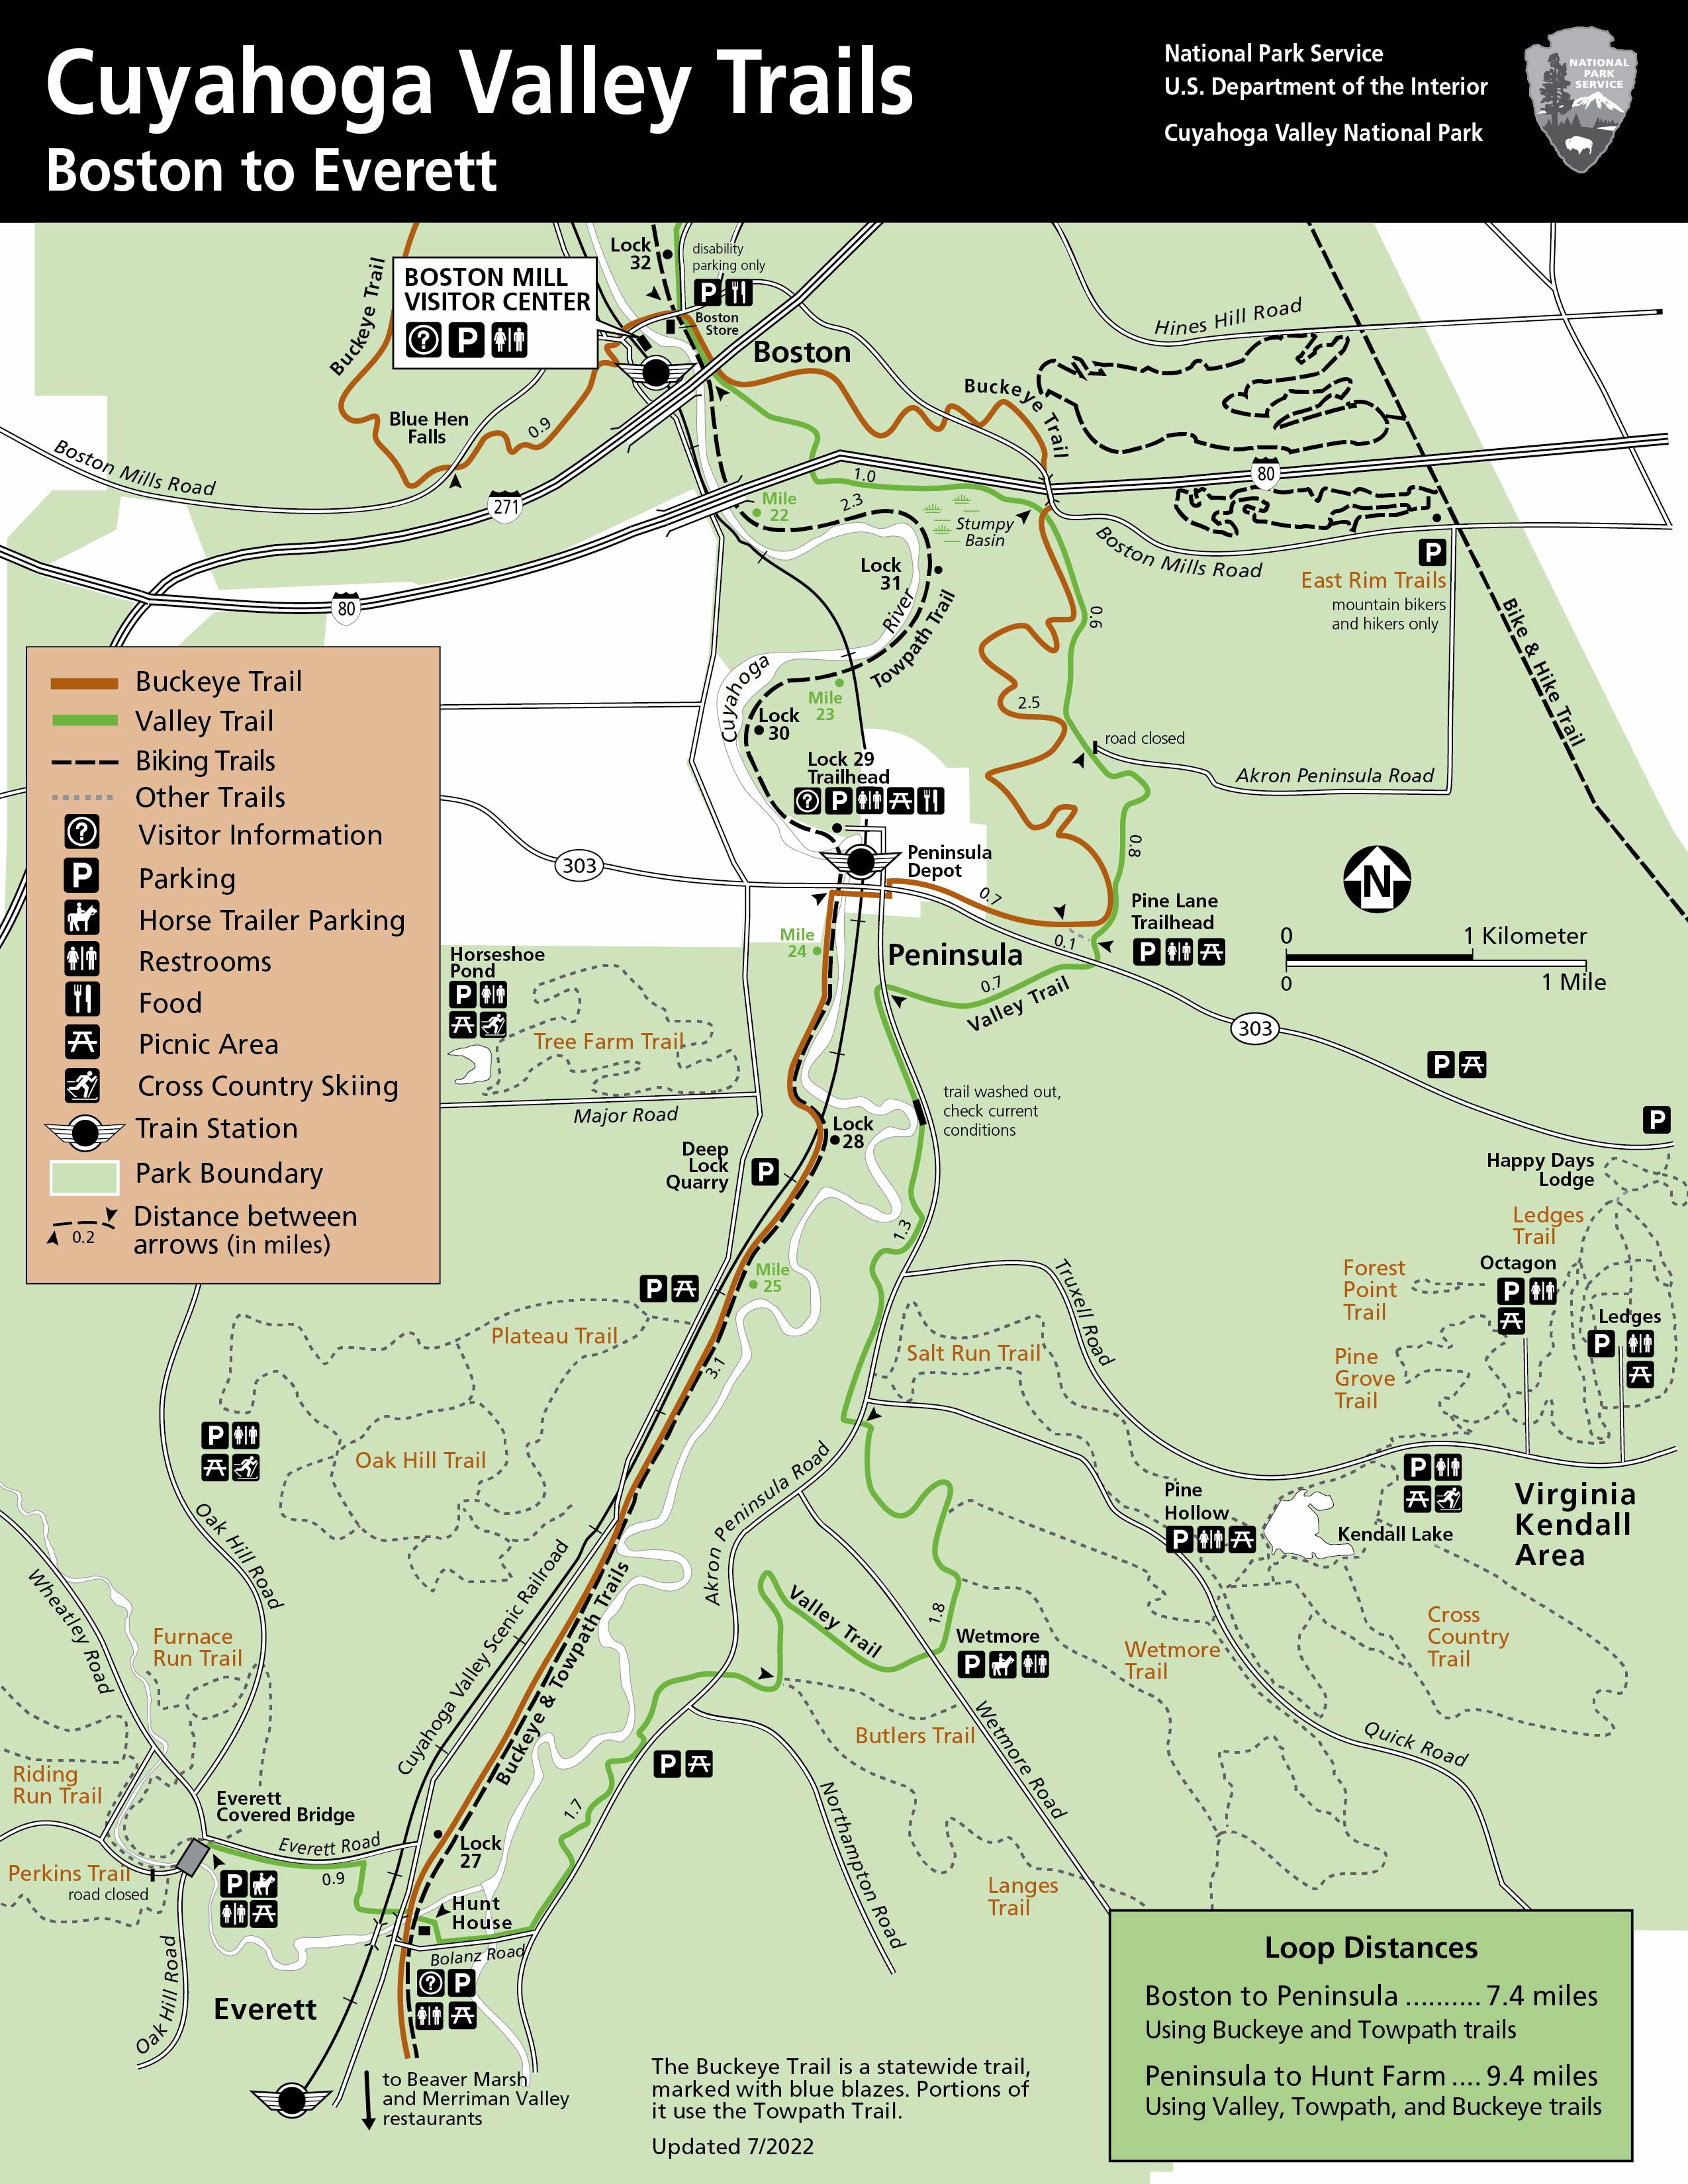 GRSA Official Park Map 2023 Showing The Dunefield Surrounded By Grasslands On The Left And Mountains On The Right - GRSA Official Park Map 2023 showing the dunefield surrounded by grasslands on the left and mountains on the right